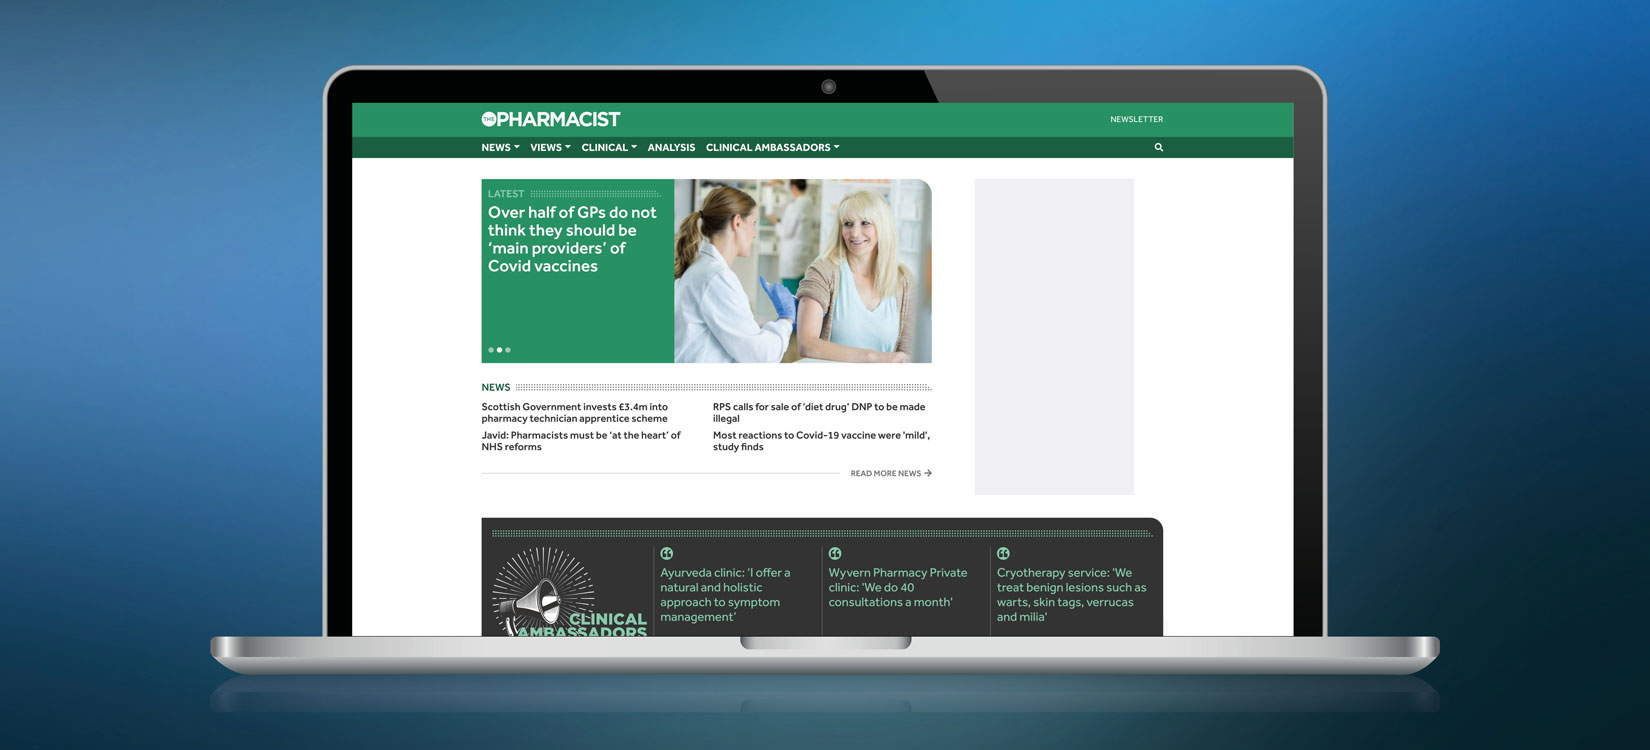 The Pharmacist has launched a new website